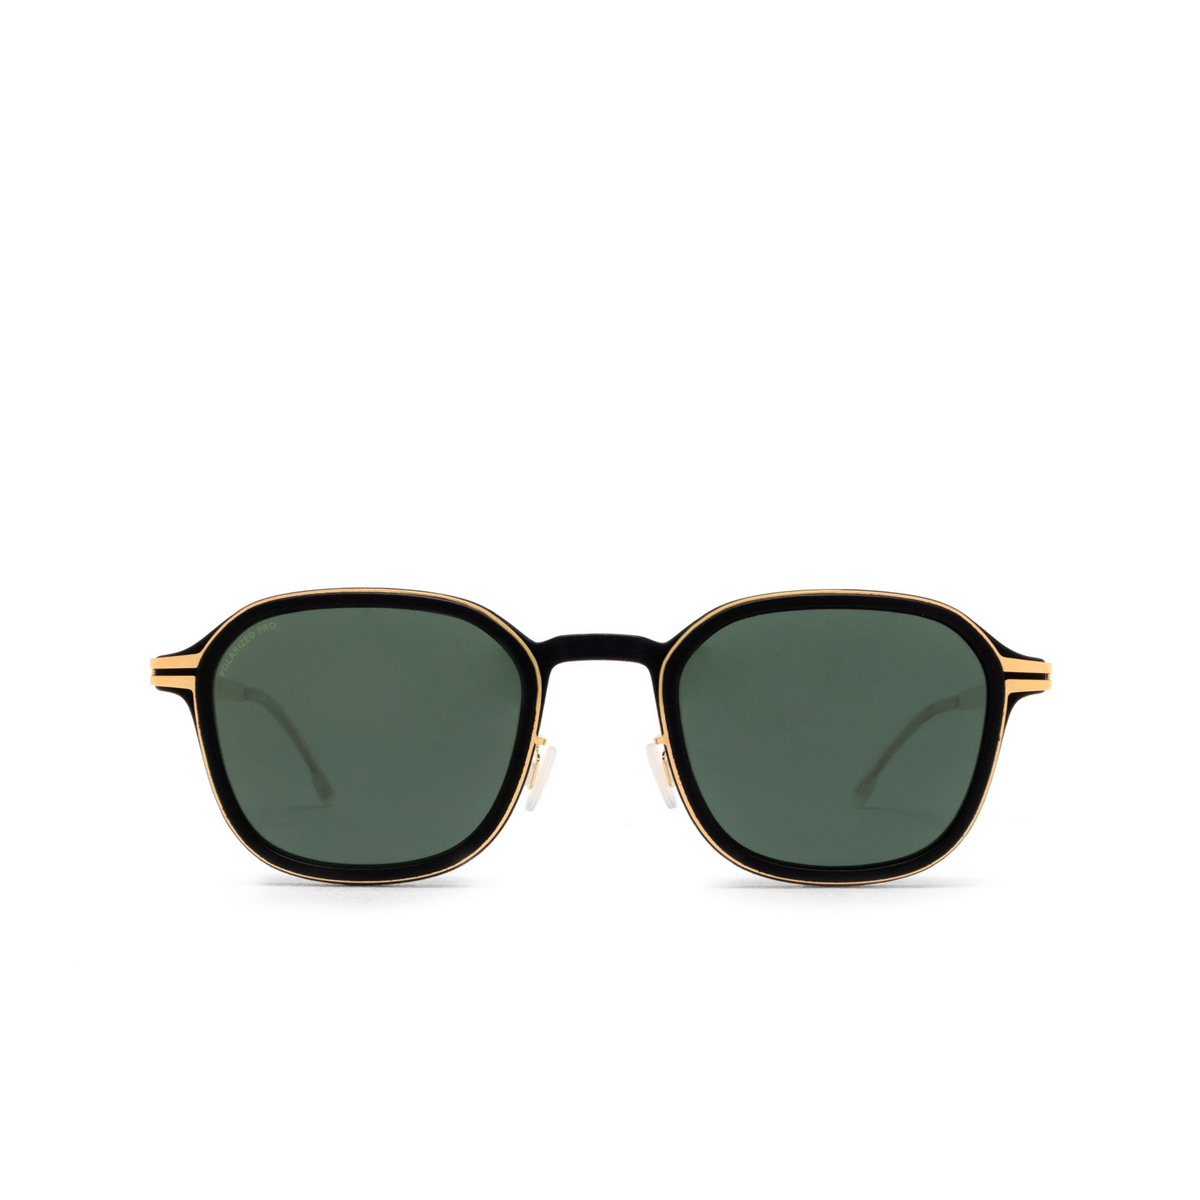 Mykita FIR SUN Sunglasses 306 MH7 Pitch Black/Glossy Gold - front view